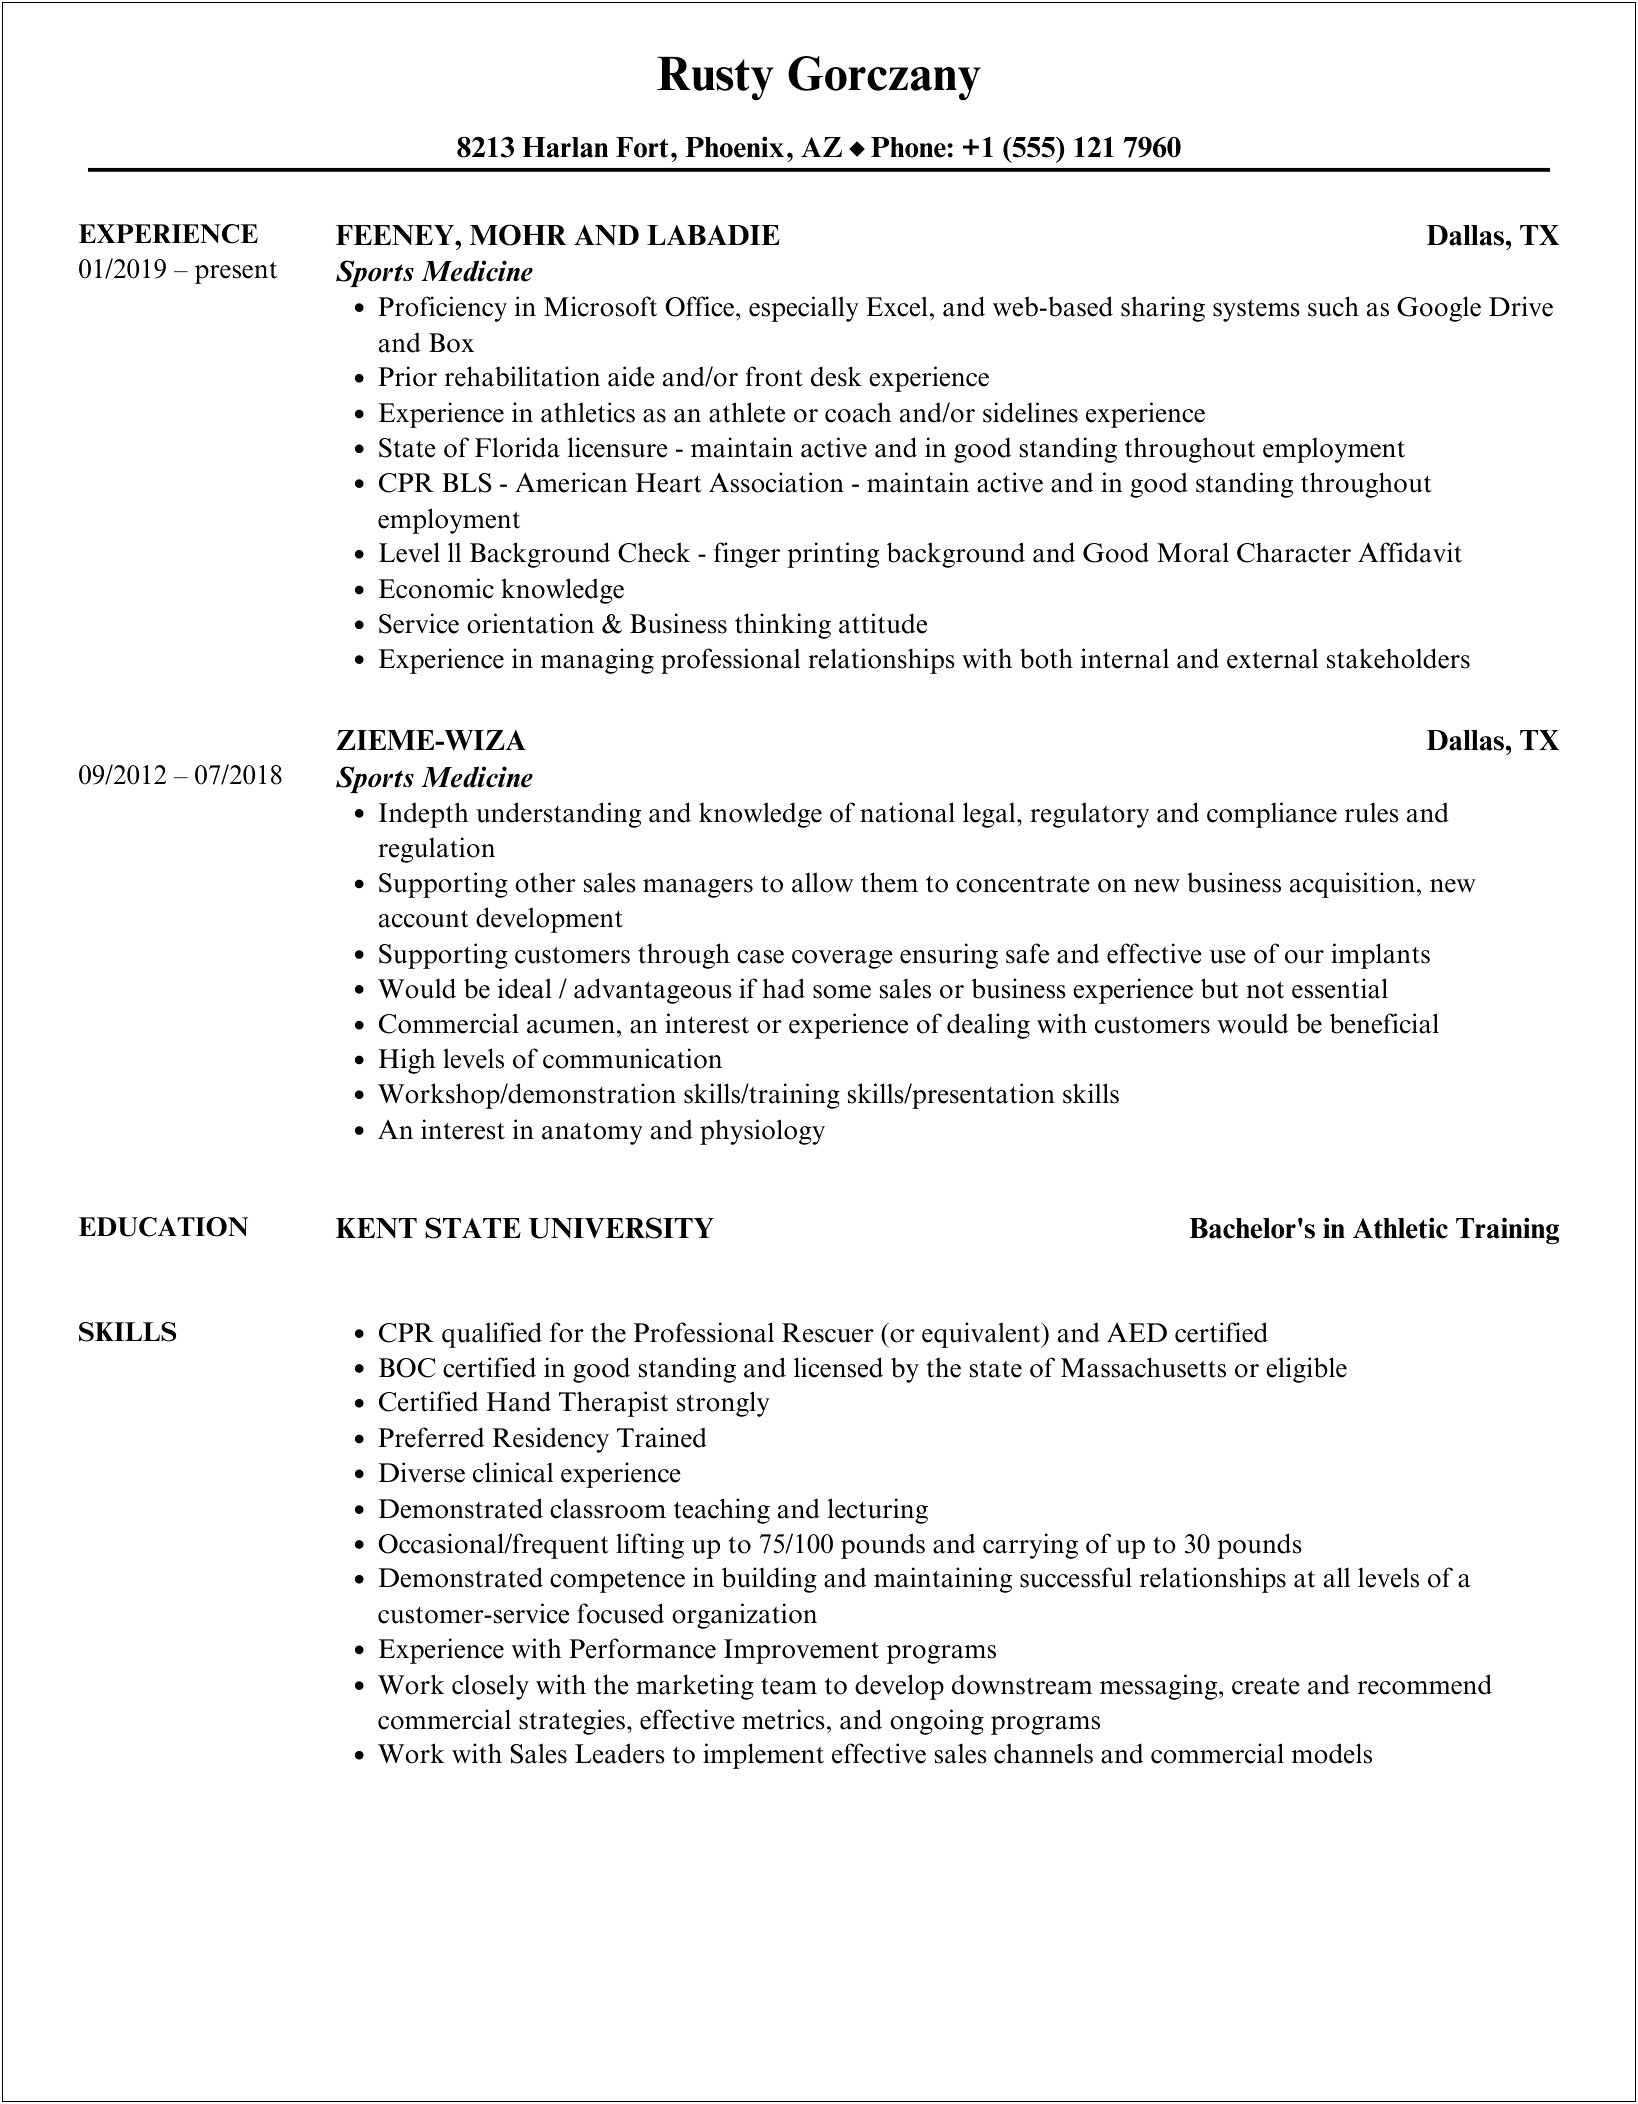 Sports Medicine Injury Evaluation Examples For Resume